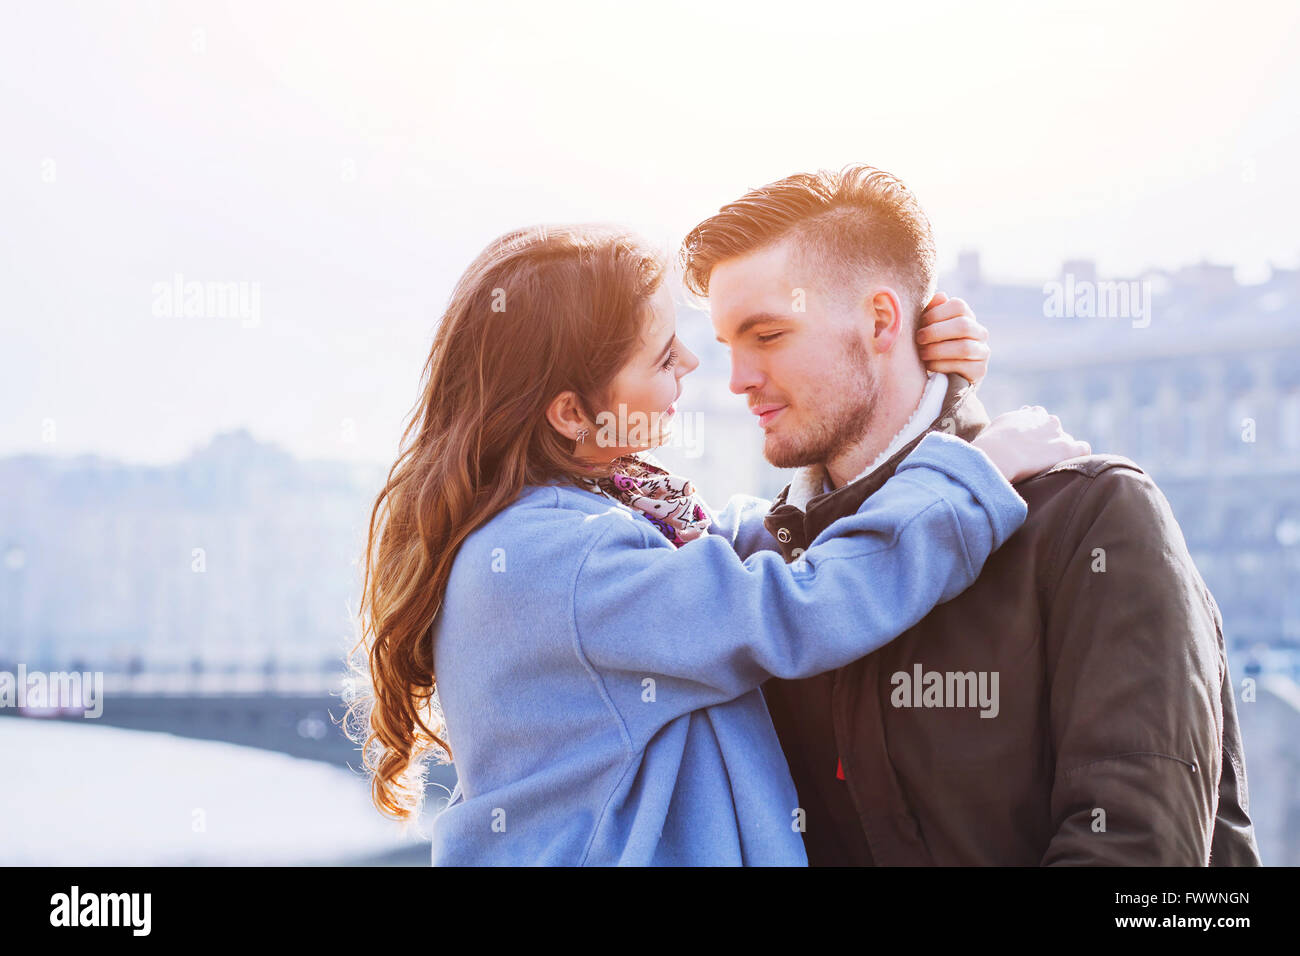 affectionate couple, portrait of young happy man and woman, love in the city Stock Photo